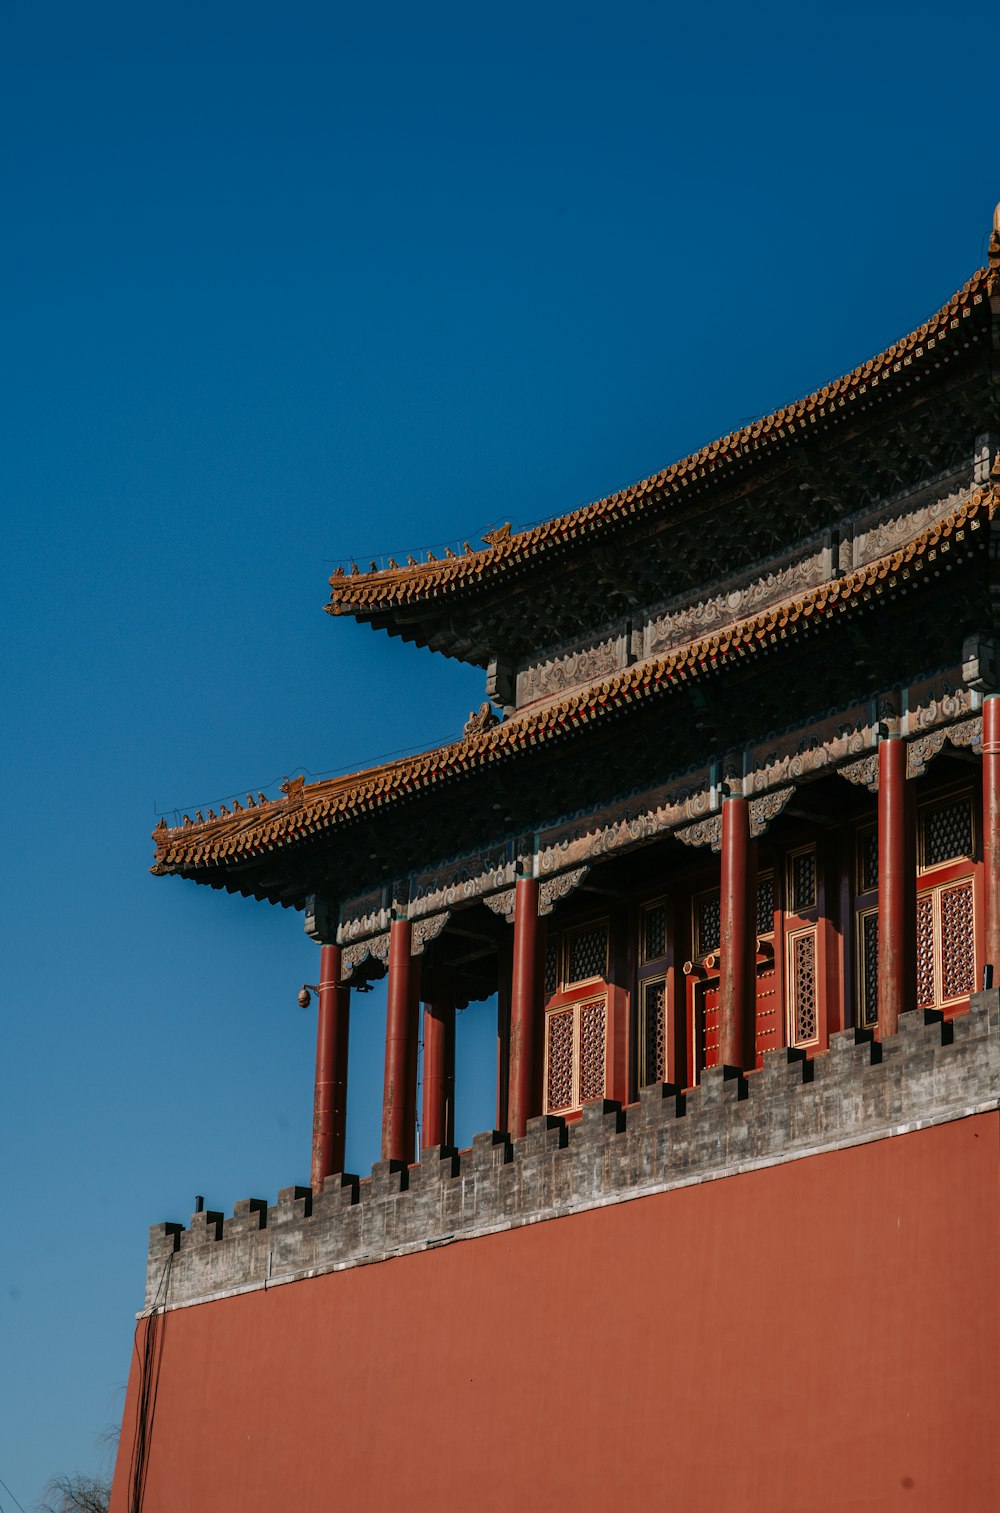 low-angle photography of a red pagoda building under a calm blue sky